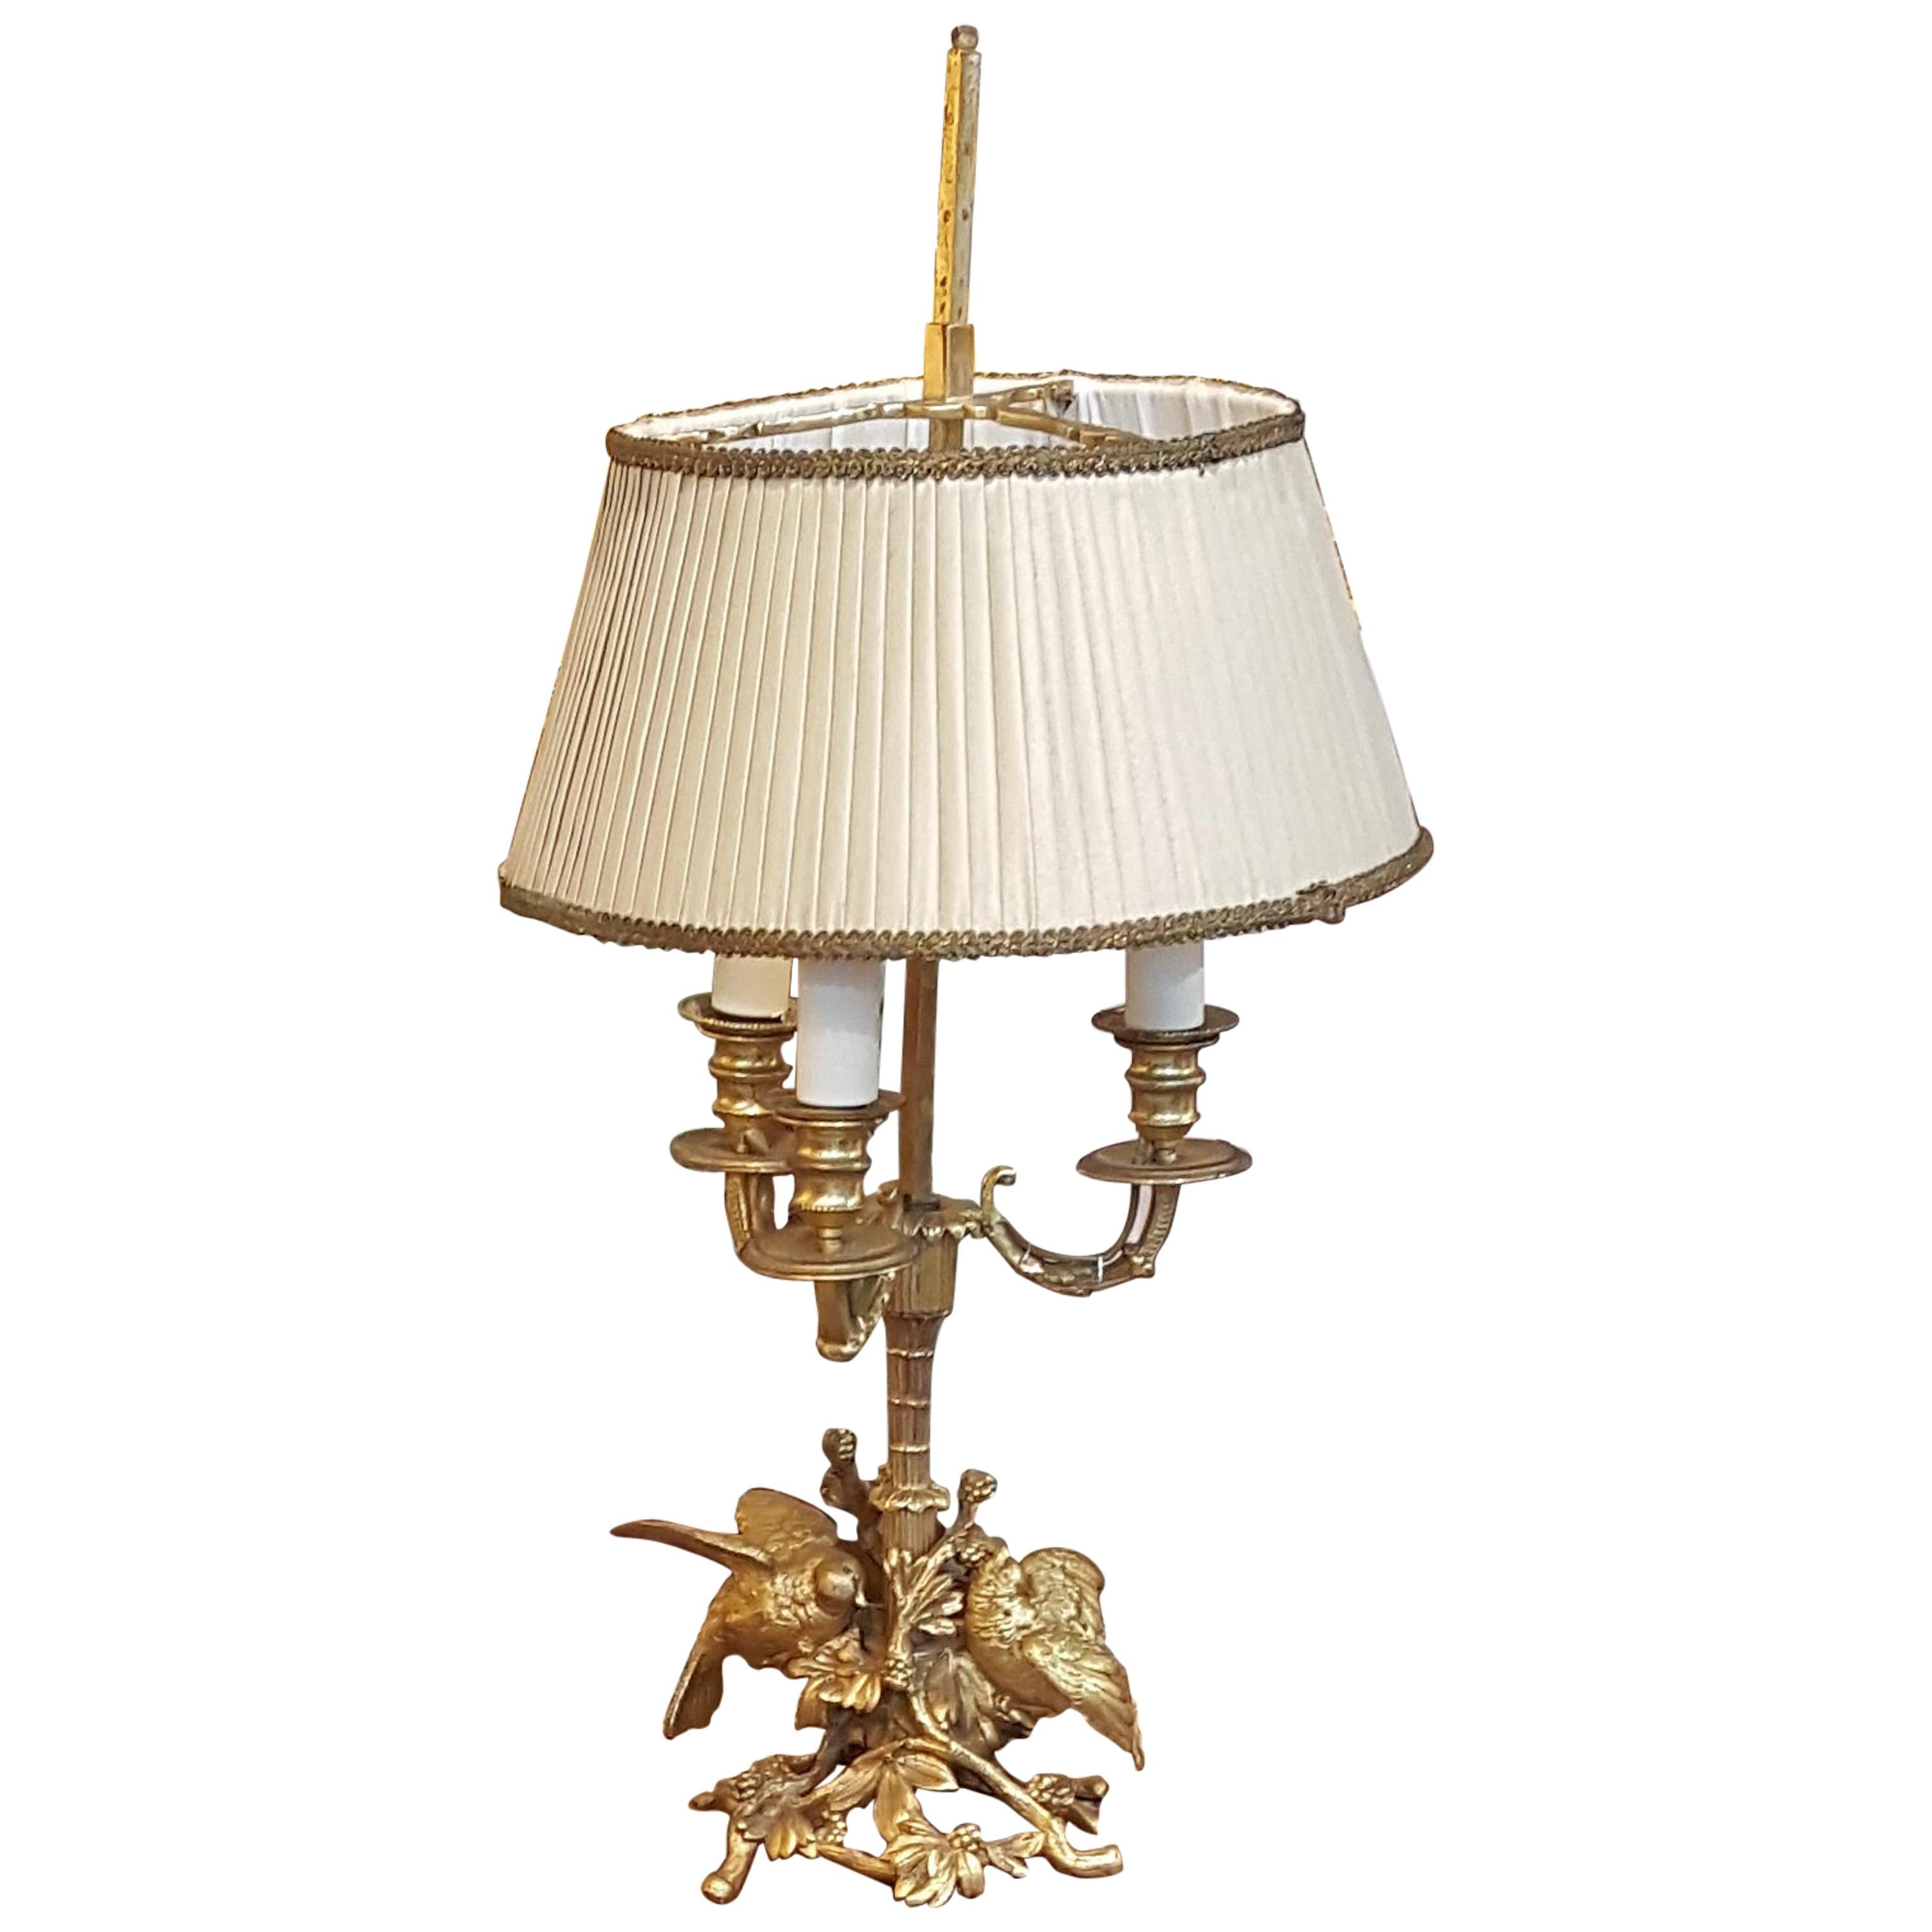  Late Victorian Gilt Metal Table Lamp